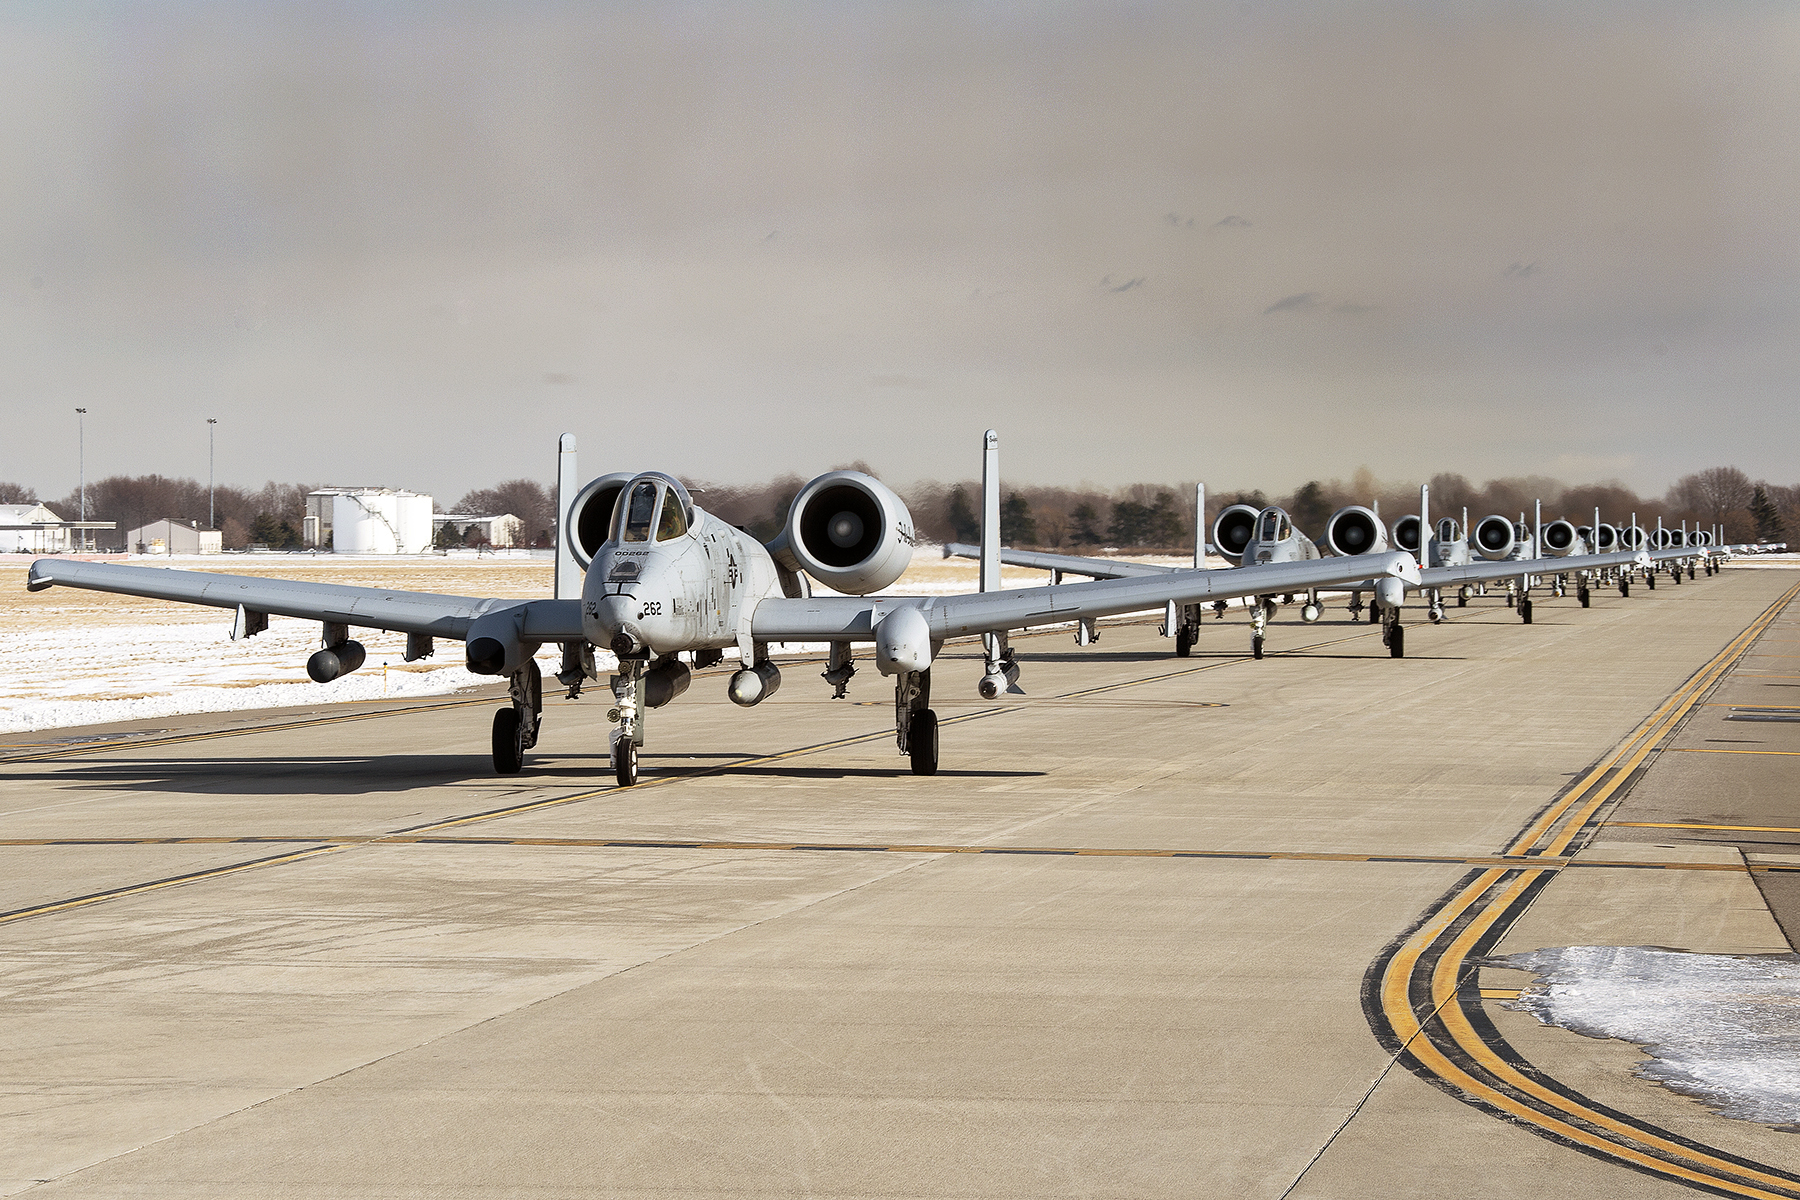 U.S. Air Force shows off ten A10 Warthogs in massive ‘elephant walk